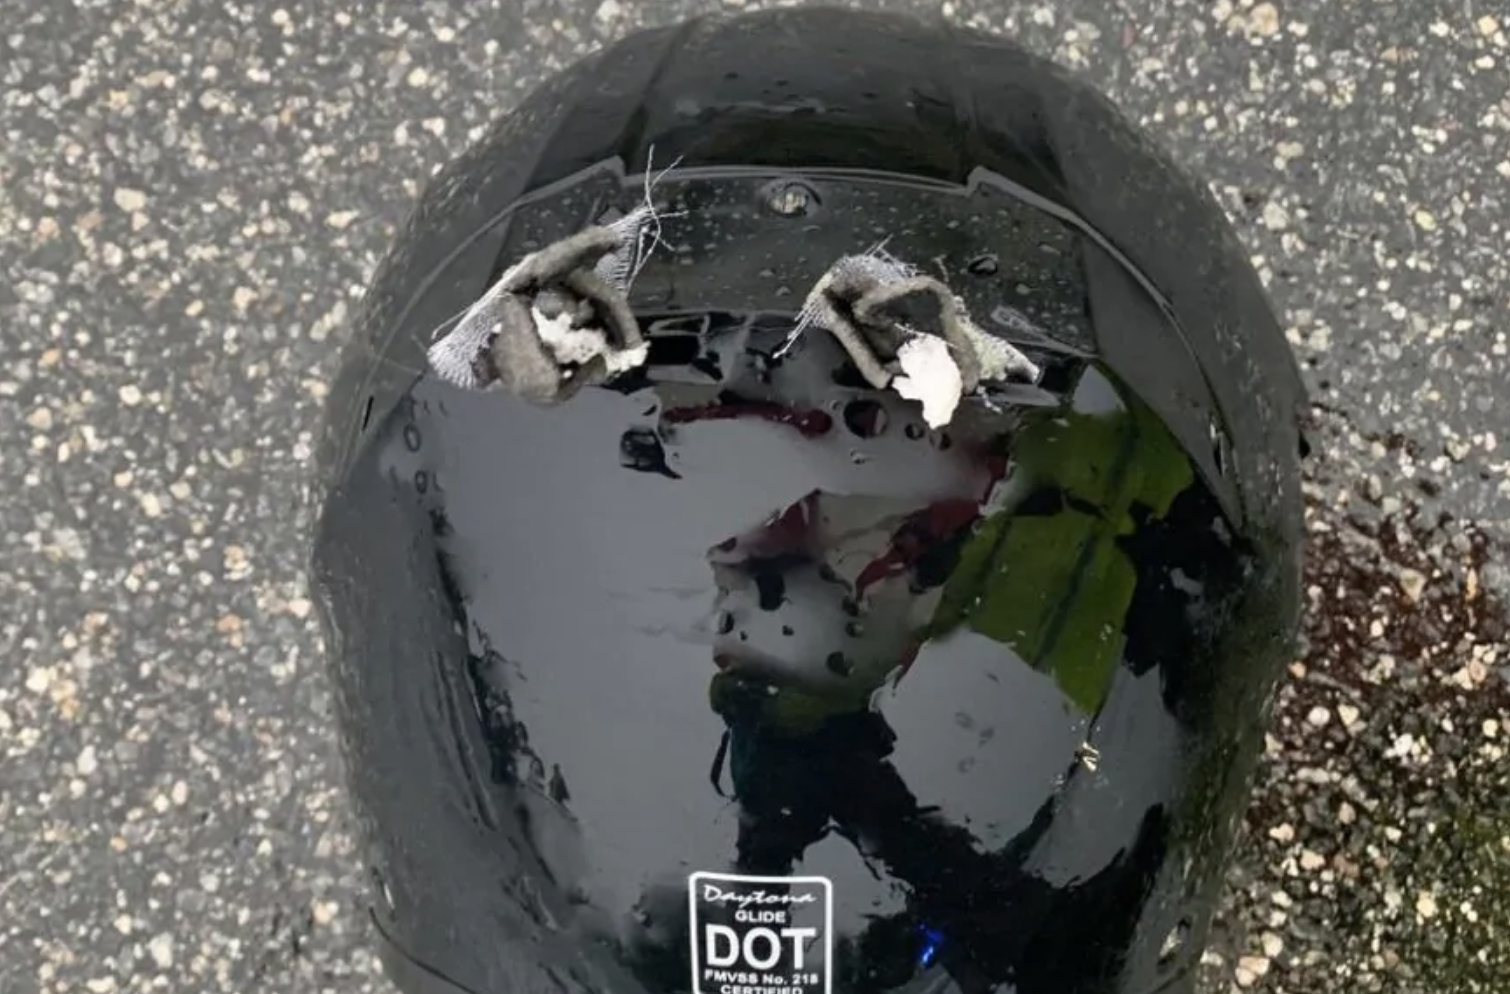 A motorcyclist's helmet after he was struck by lightning, while riding in Florida on I-95